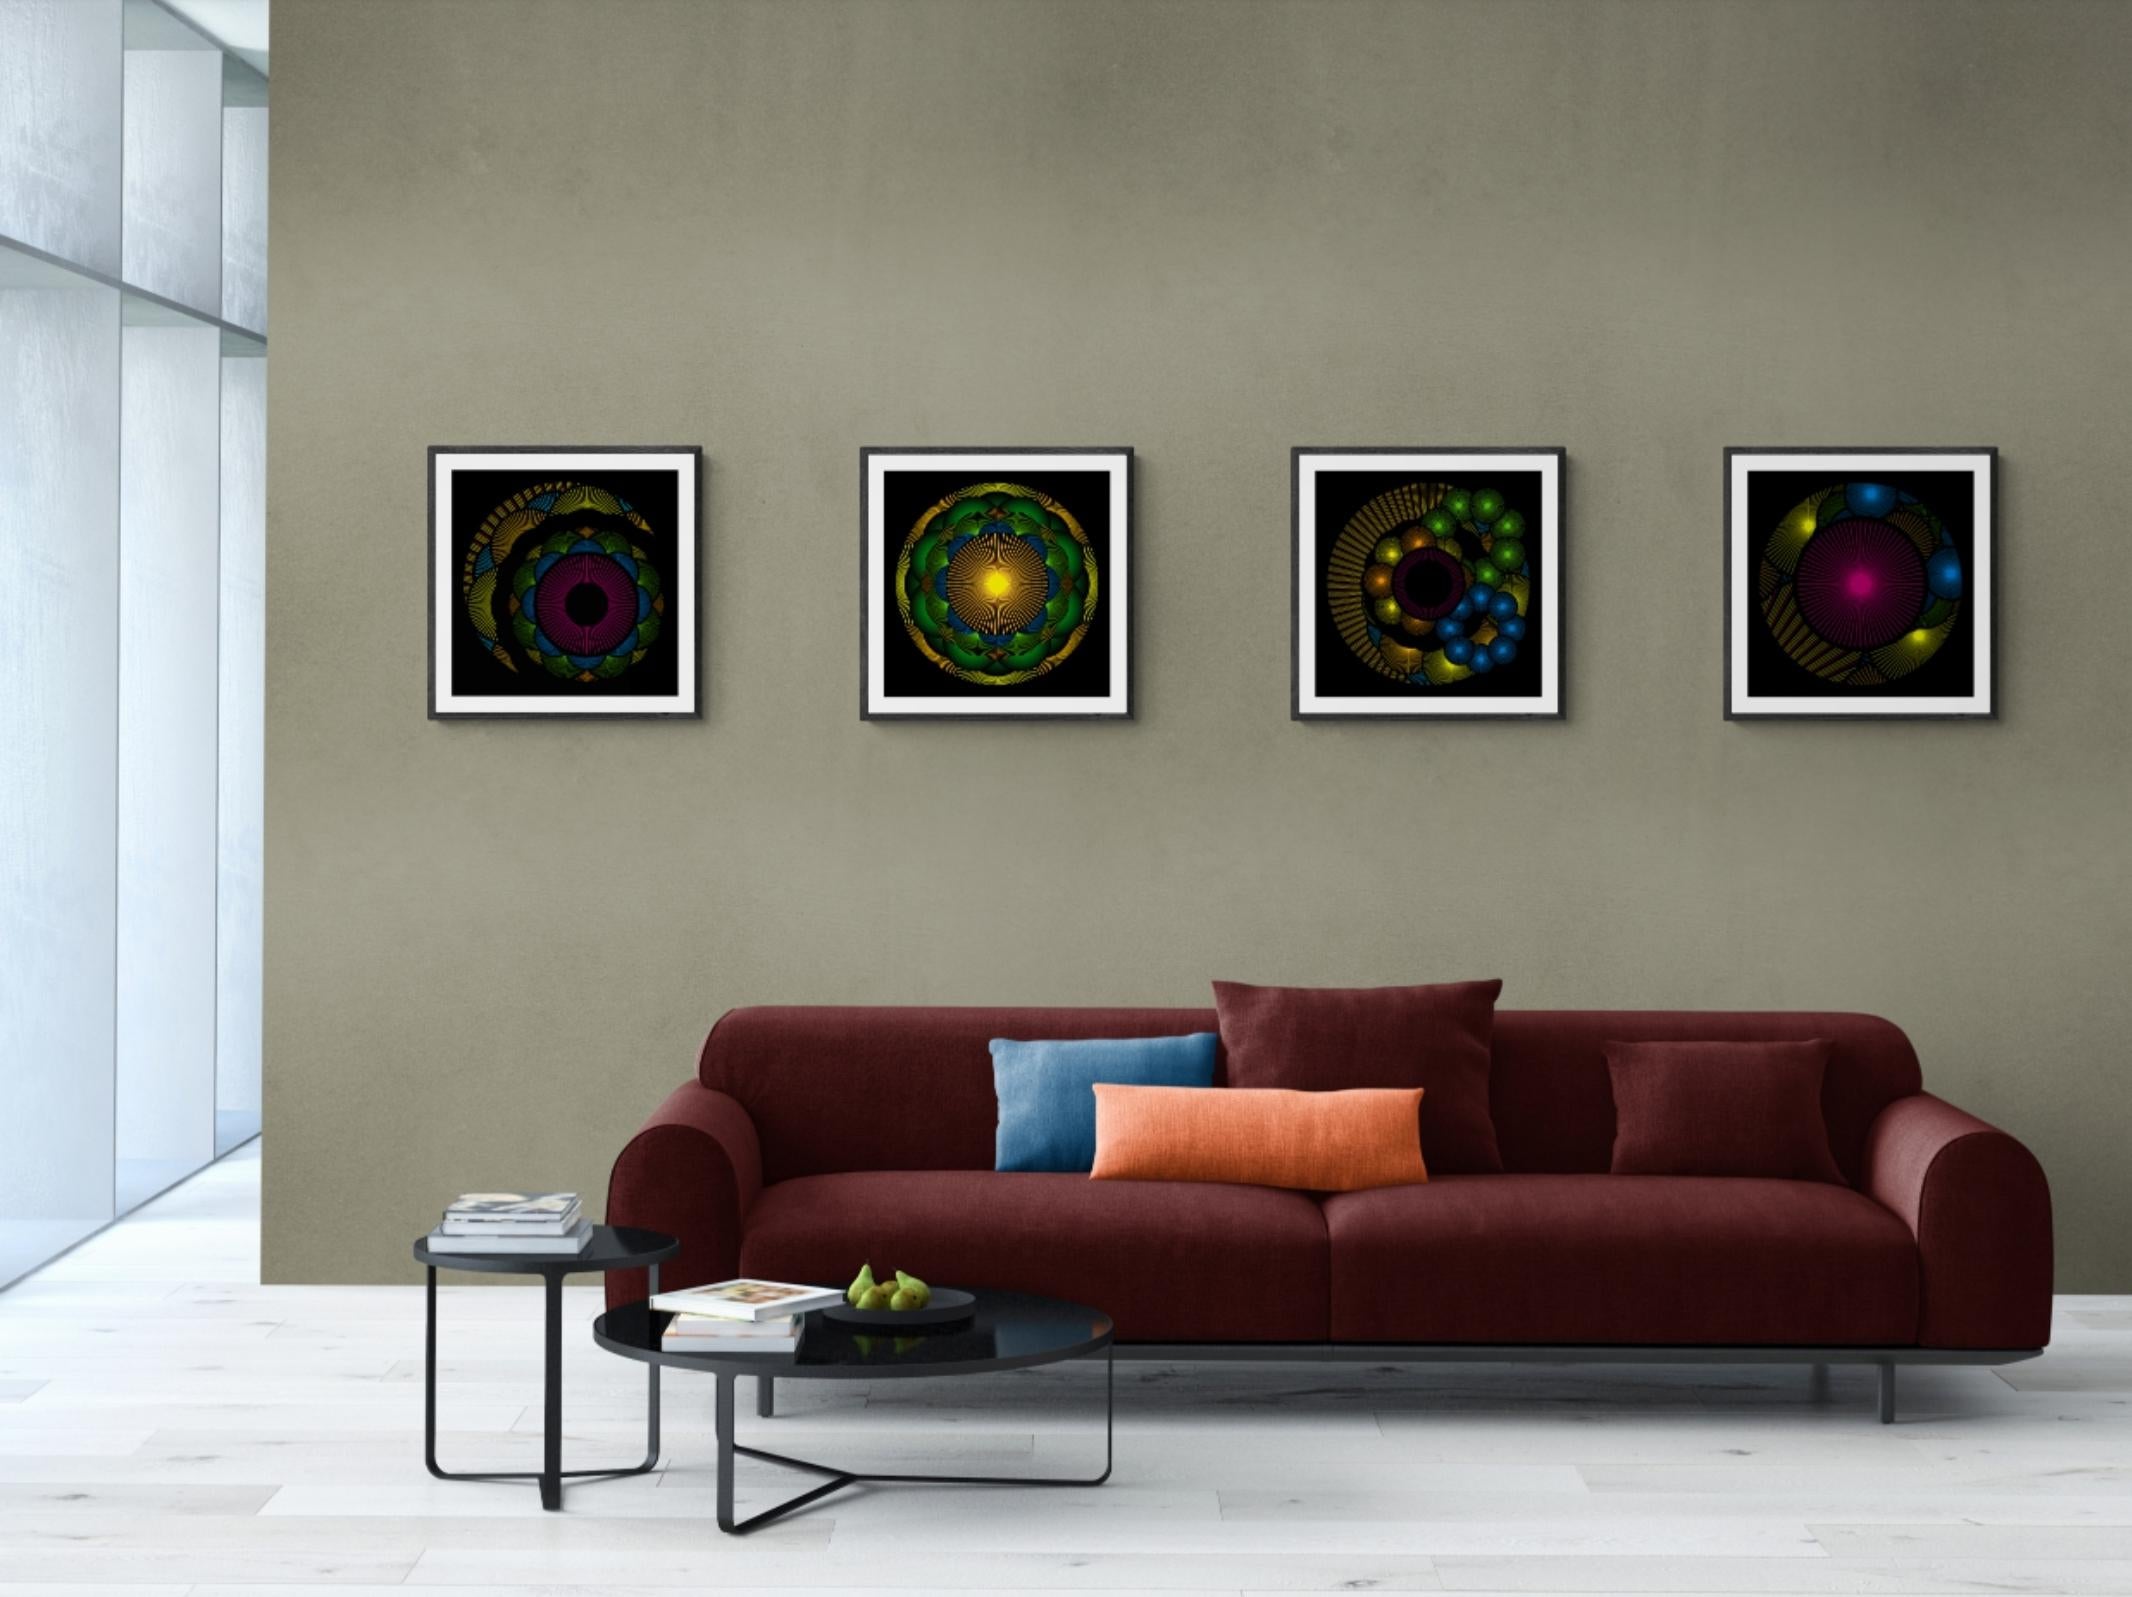 Nebulosa 18 - Black Abstract Print by Julio Campos